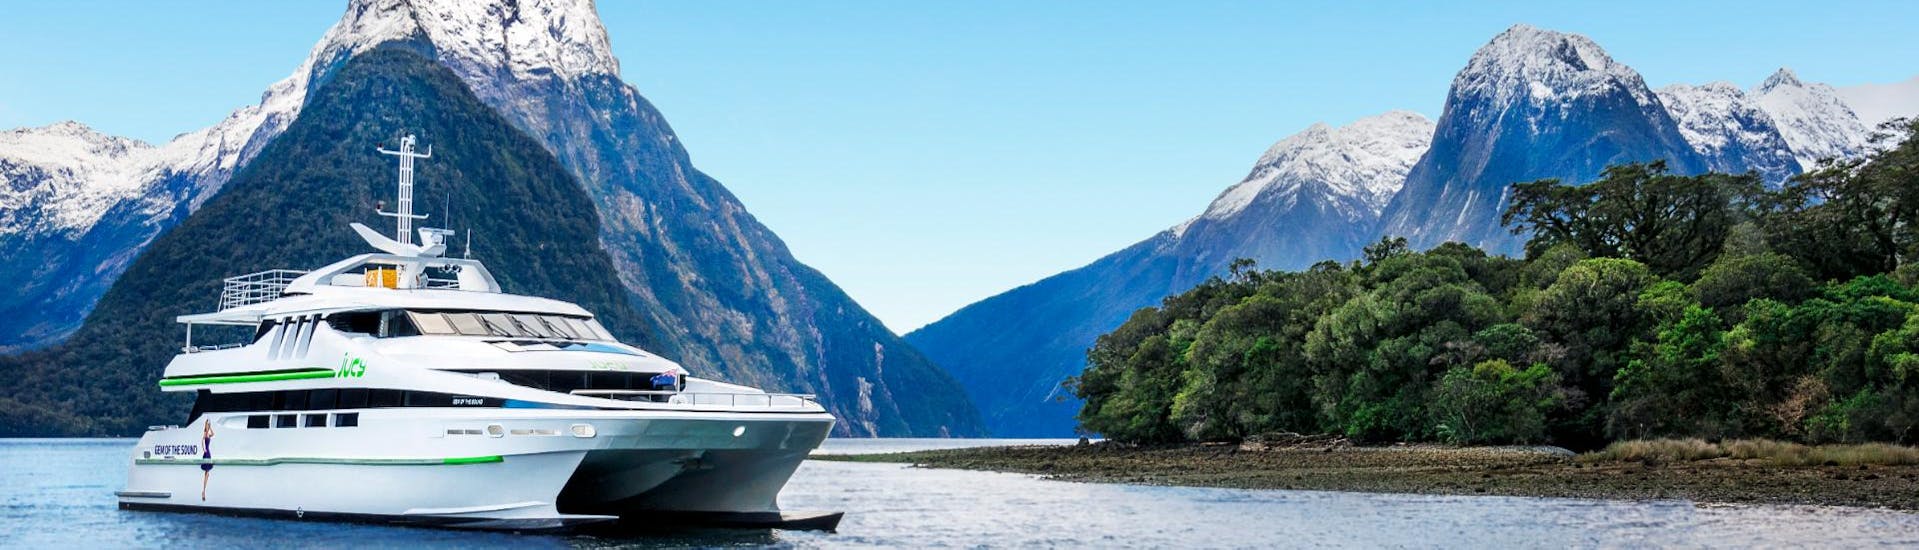 During the Coach Tour with Milford Sound Cruise - Gem Tour, a superb catamaran operated by Jucy Cruise is on the way to stunning waterfalls.